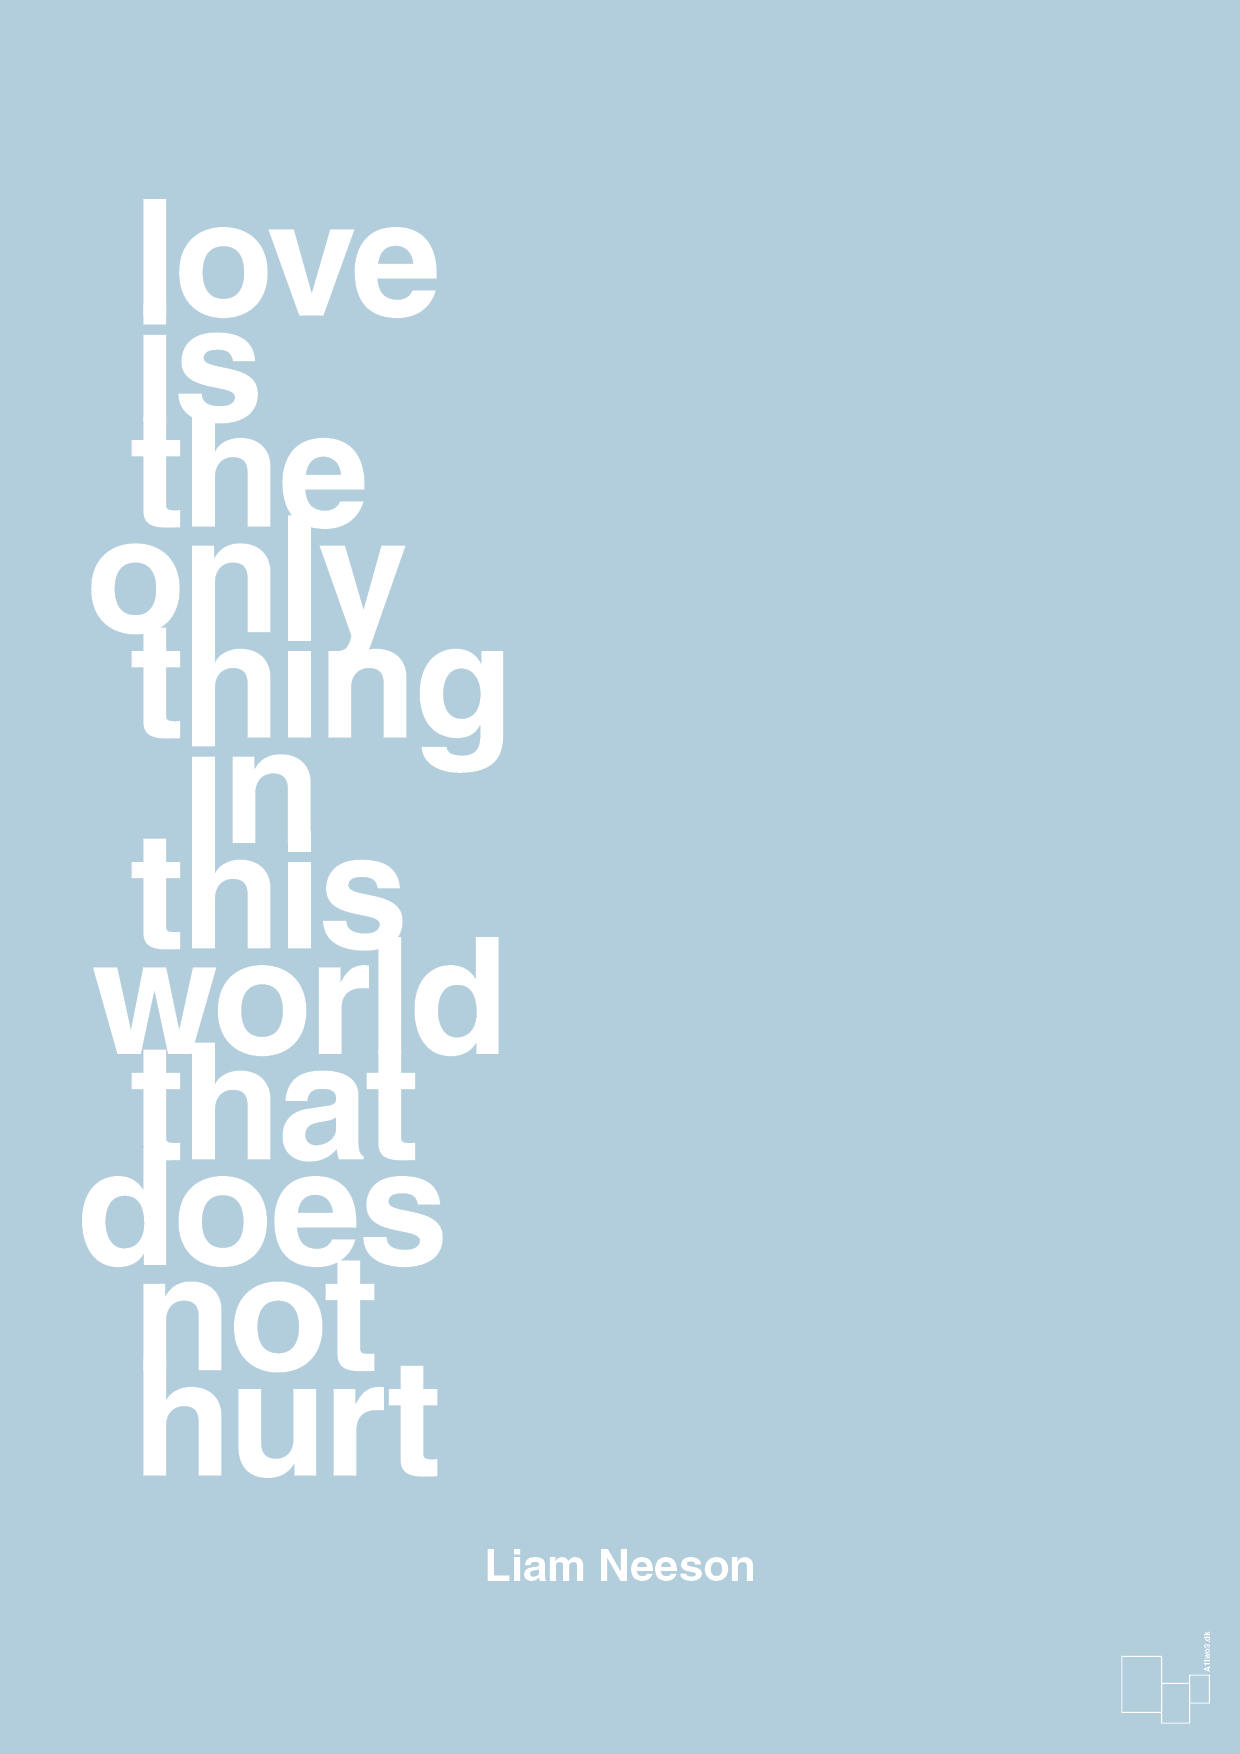 love is the only thing in this world that does not hurt - Plakat med Citater i Heavenly Blue